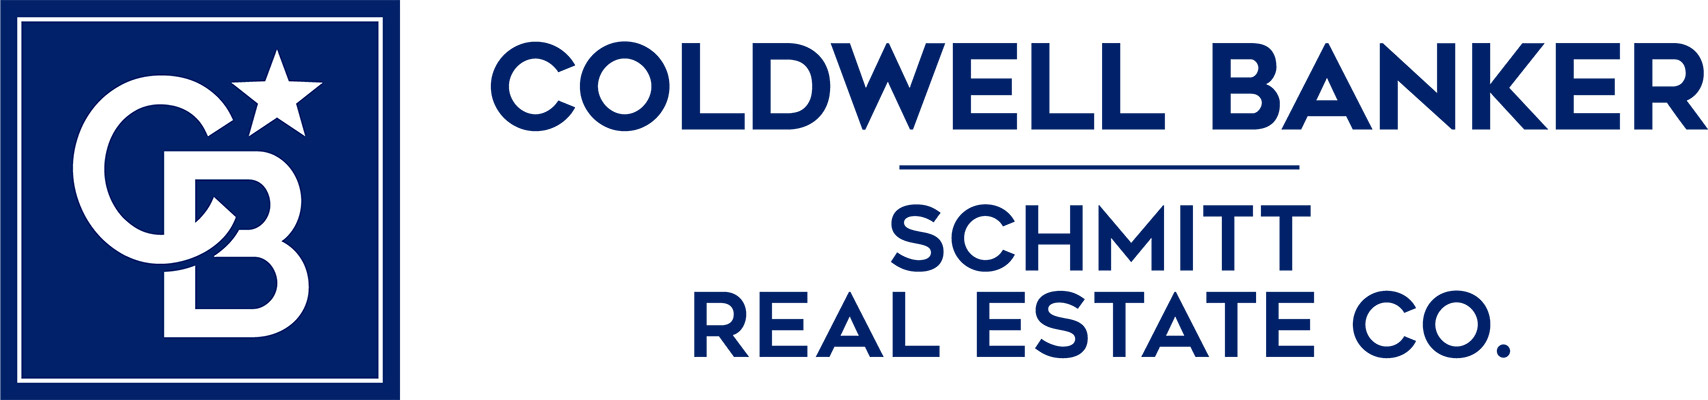 Roy Haase - Coldwell Banker Logo